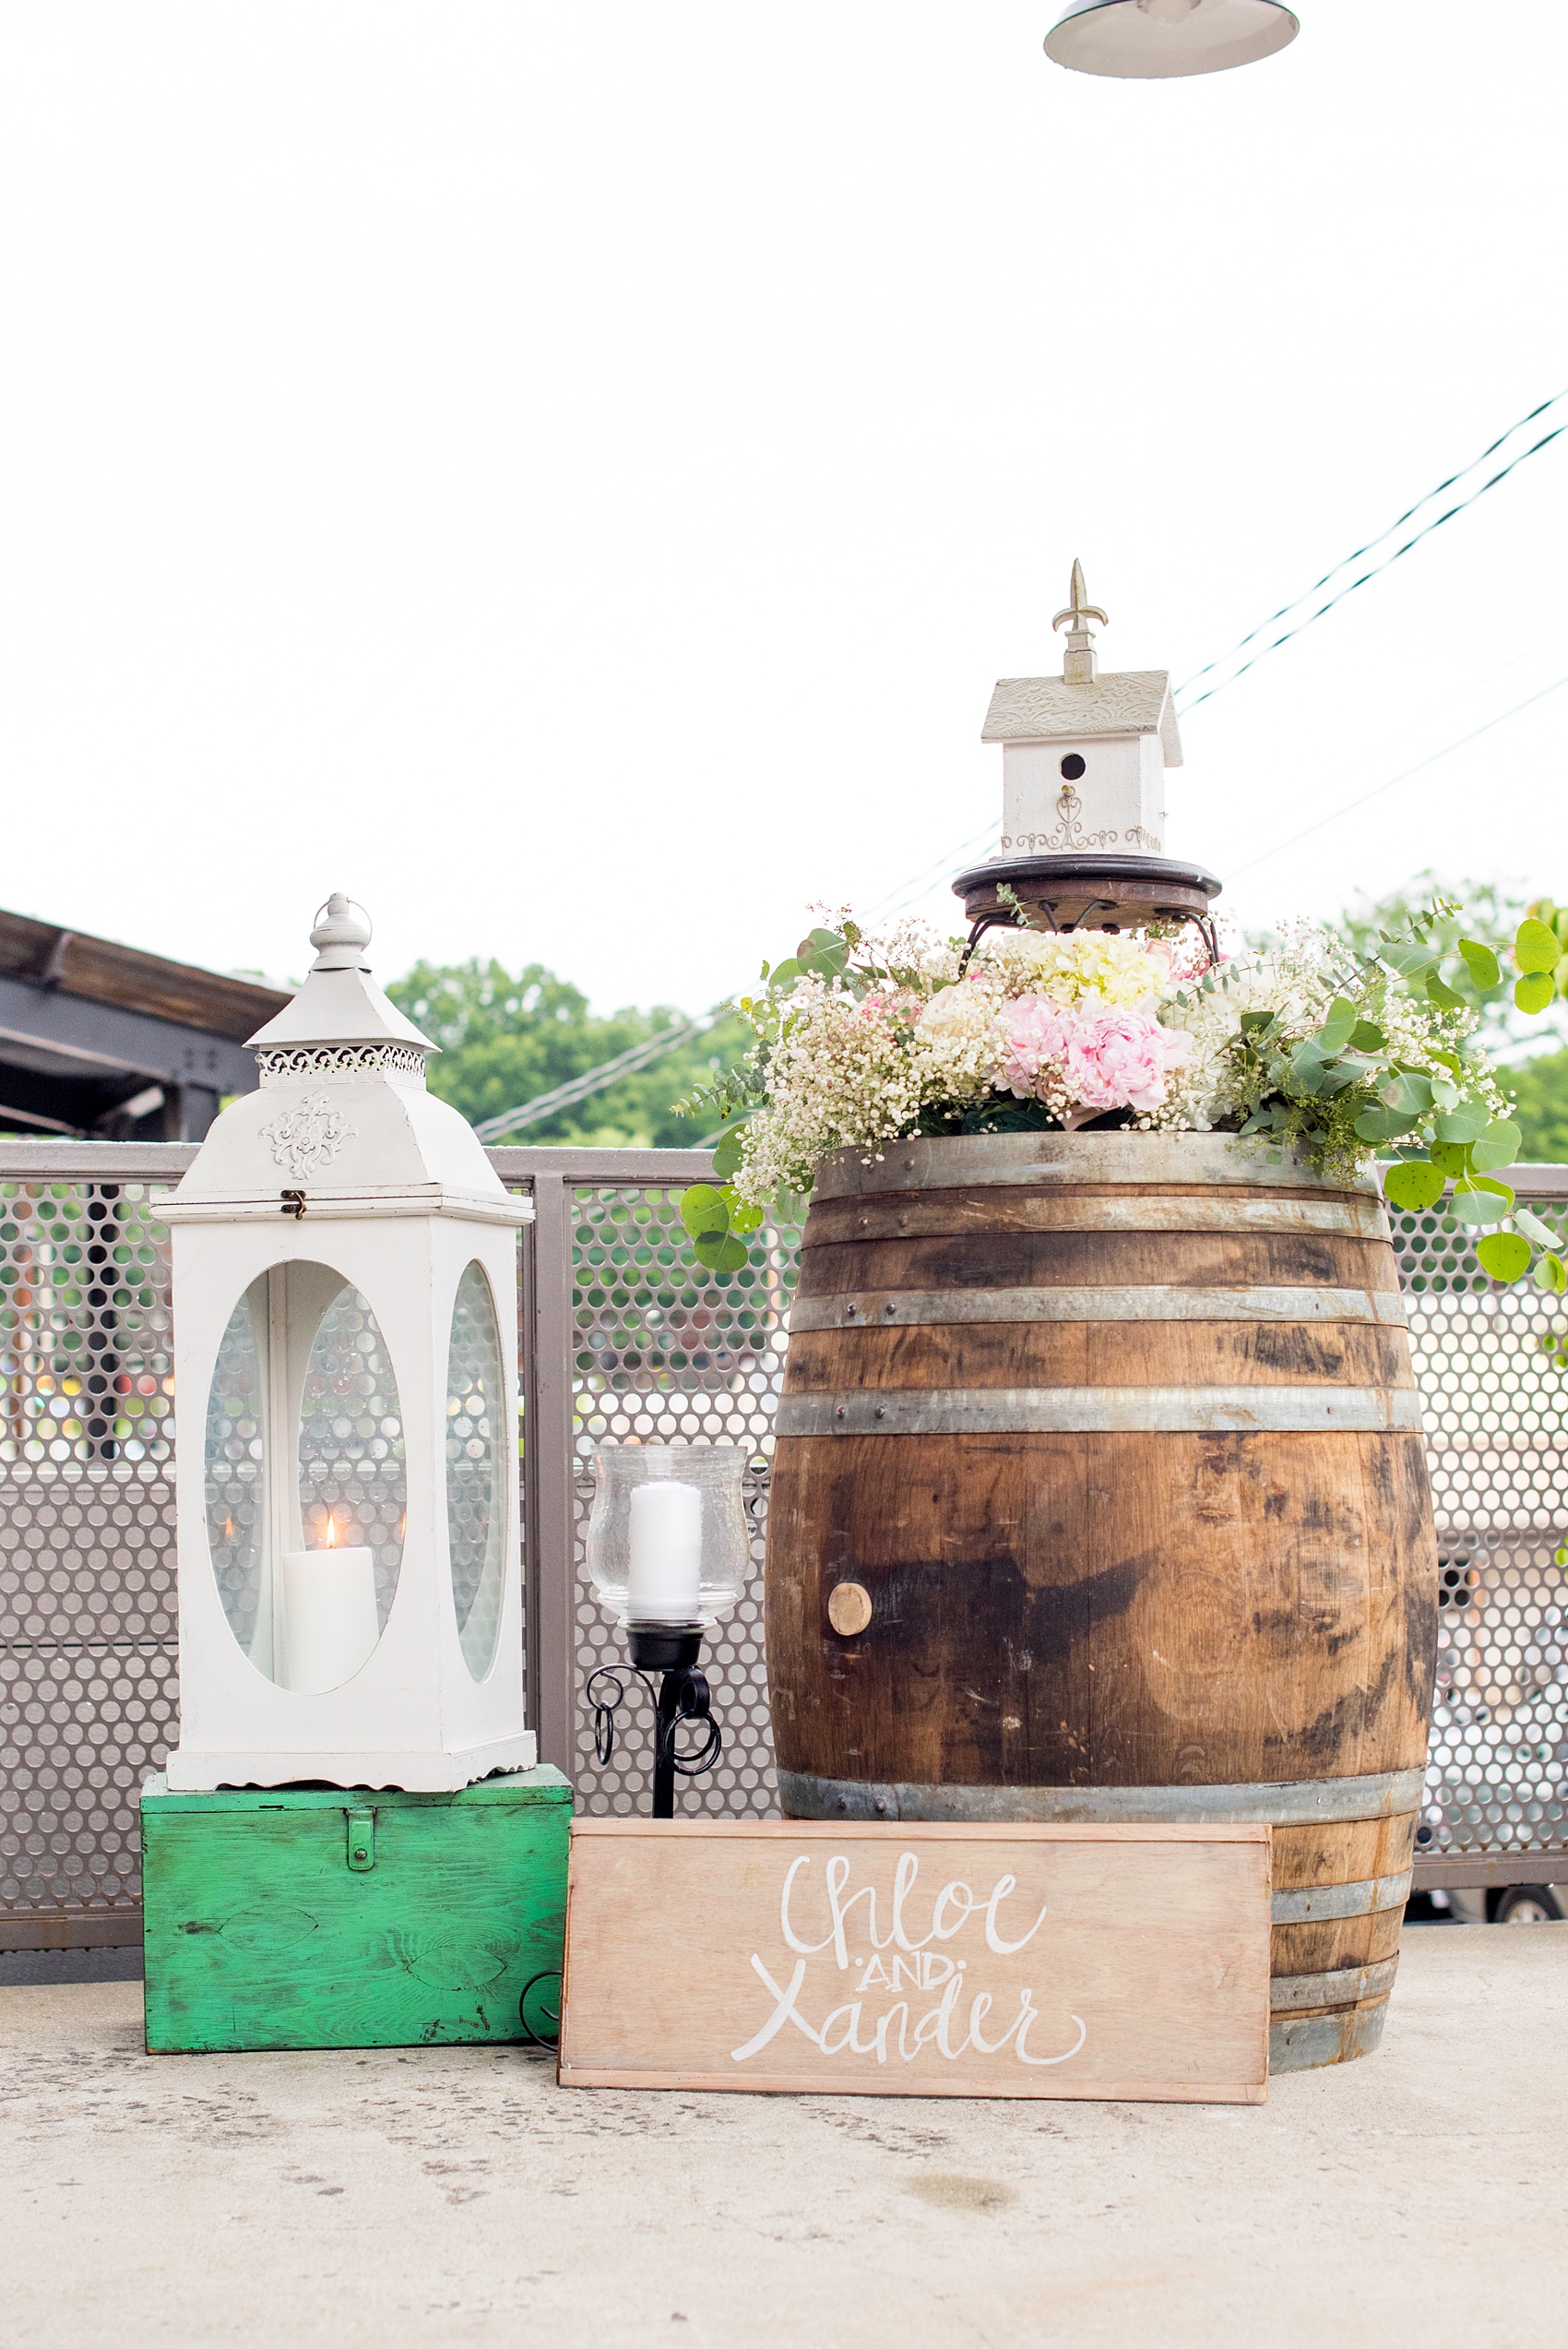 Mikkel Paige Photography photos from a wedding in Durham, North Carolina. Picture of the entrance to their wedding at The Rickhouse including flowers, a whiskey barrel, lantern and a birdhouse.